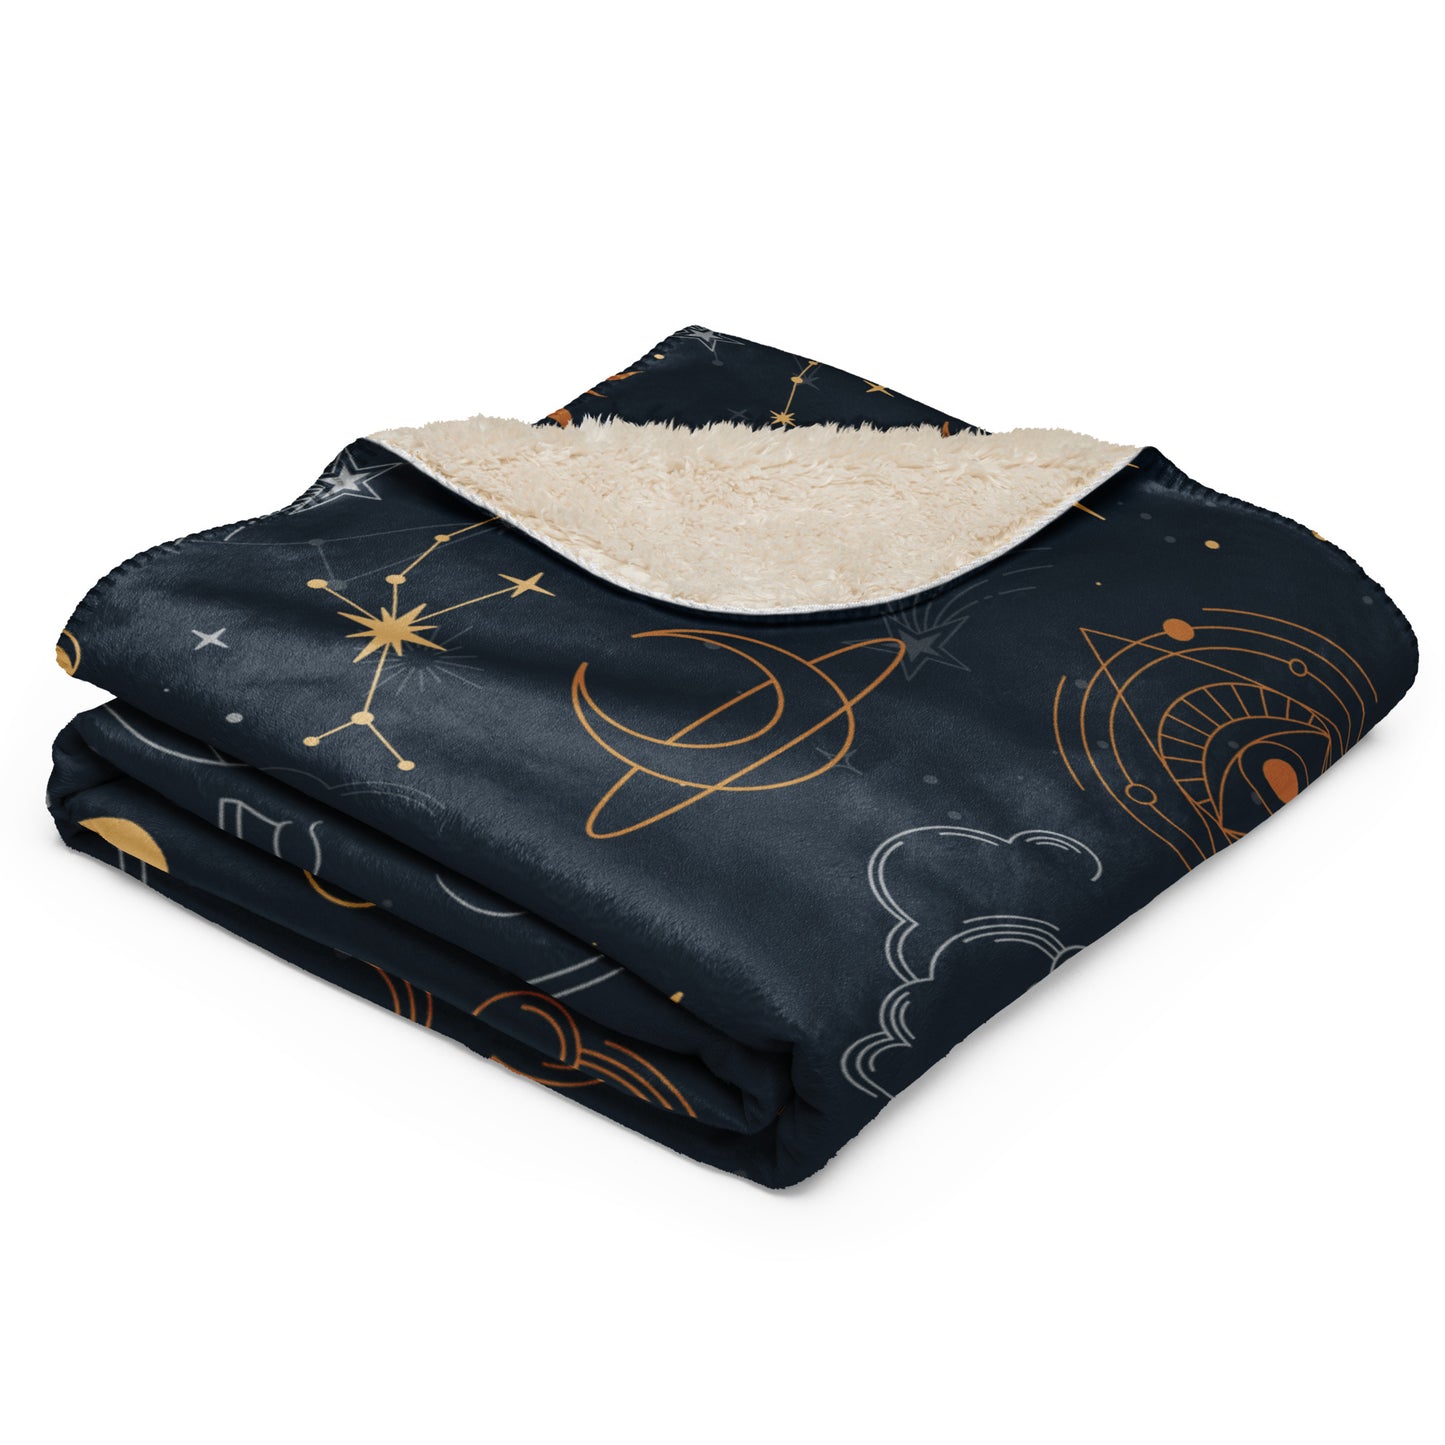 Under the planets blanket